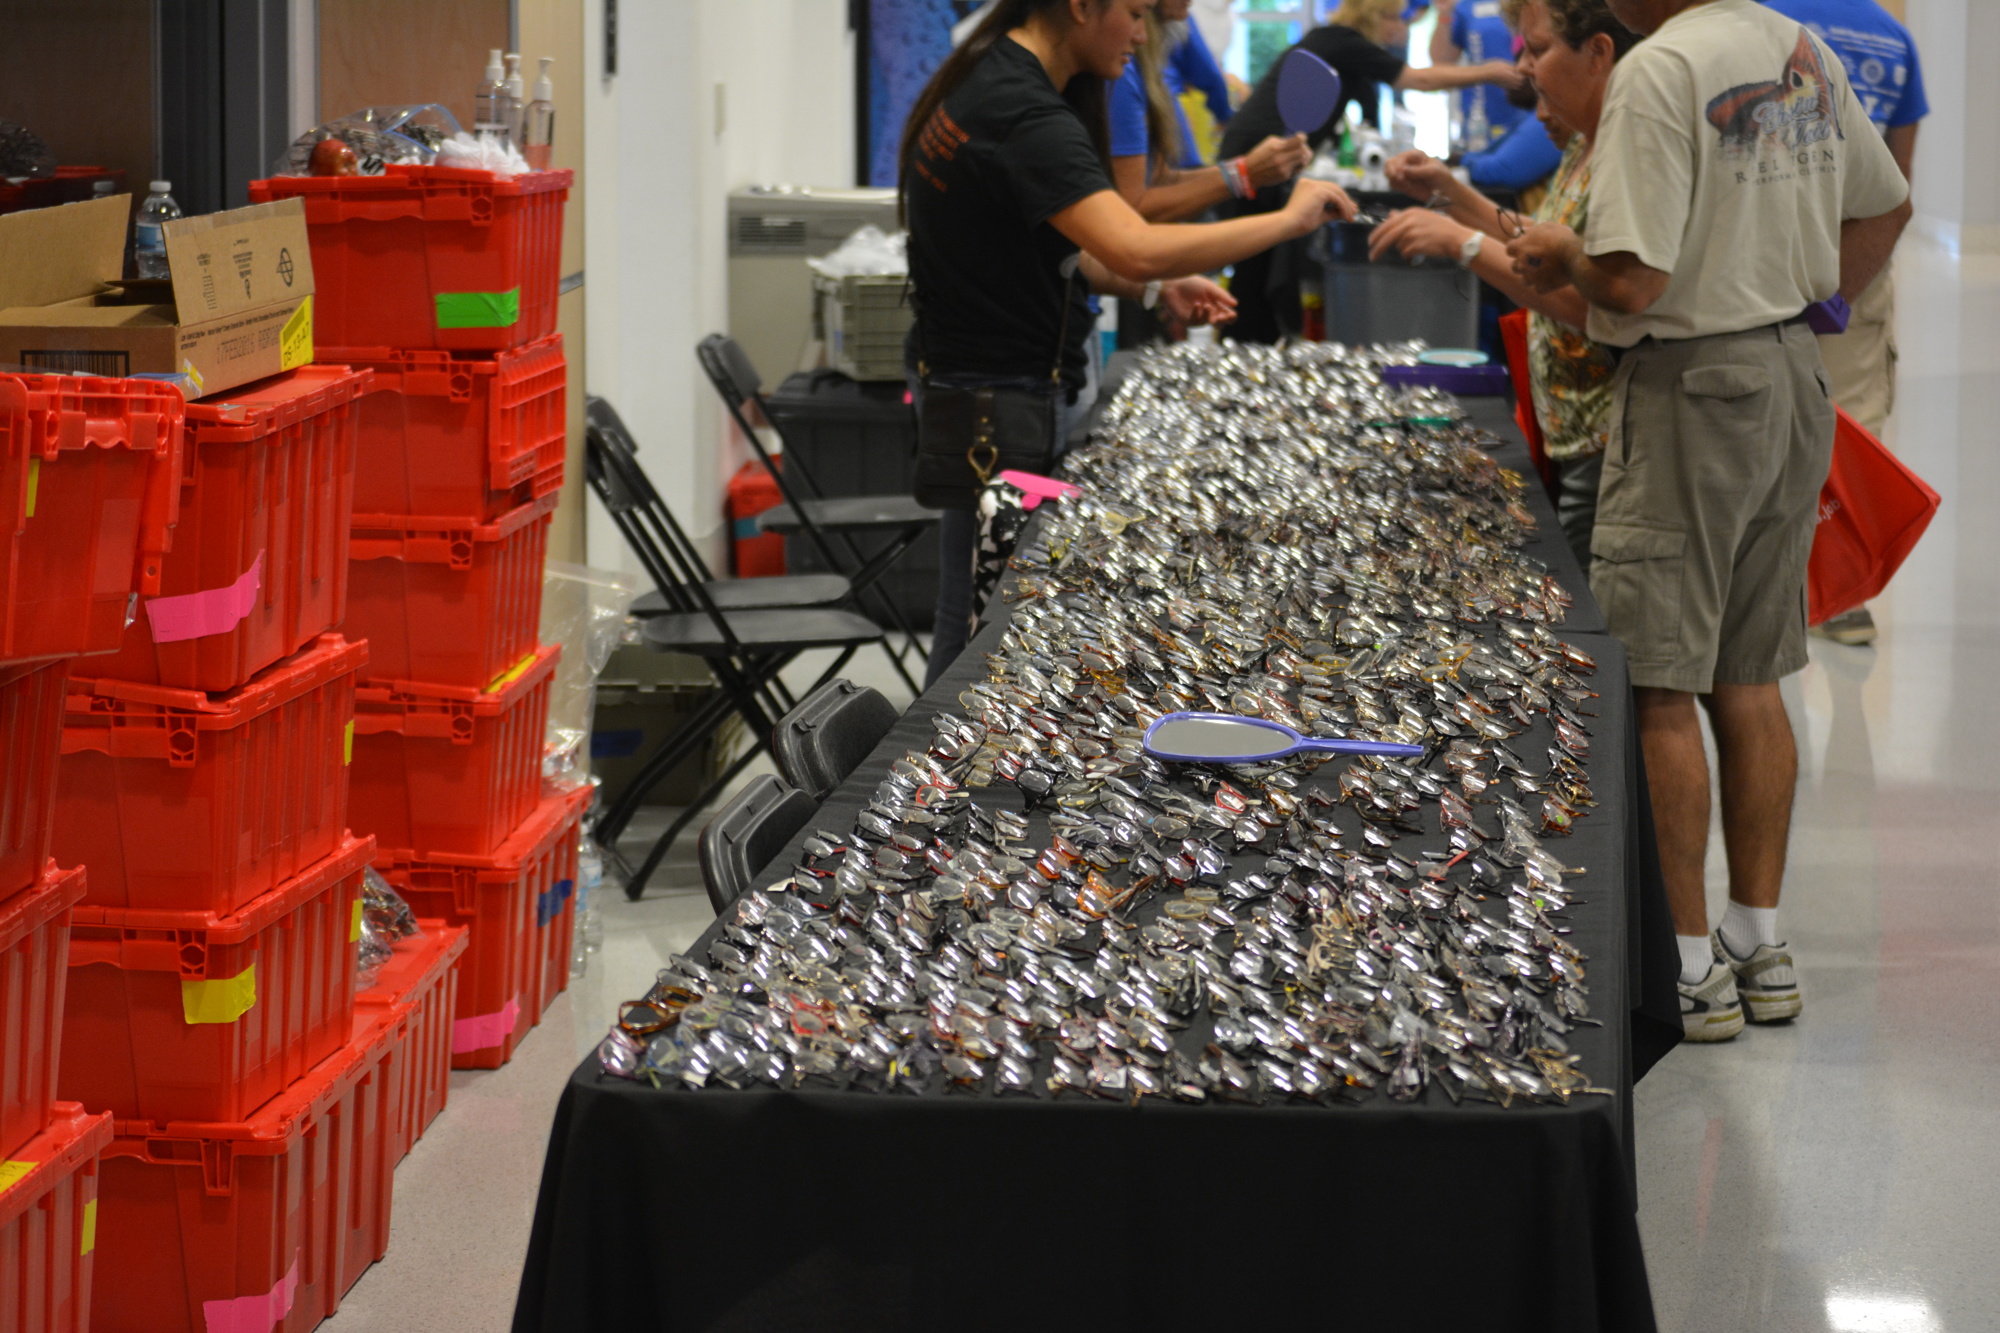 Patients had their pick of hundreds of pairs of glasses on Saturday at Remote Area Medical's clinic at Manatee Technical College.